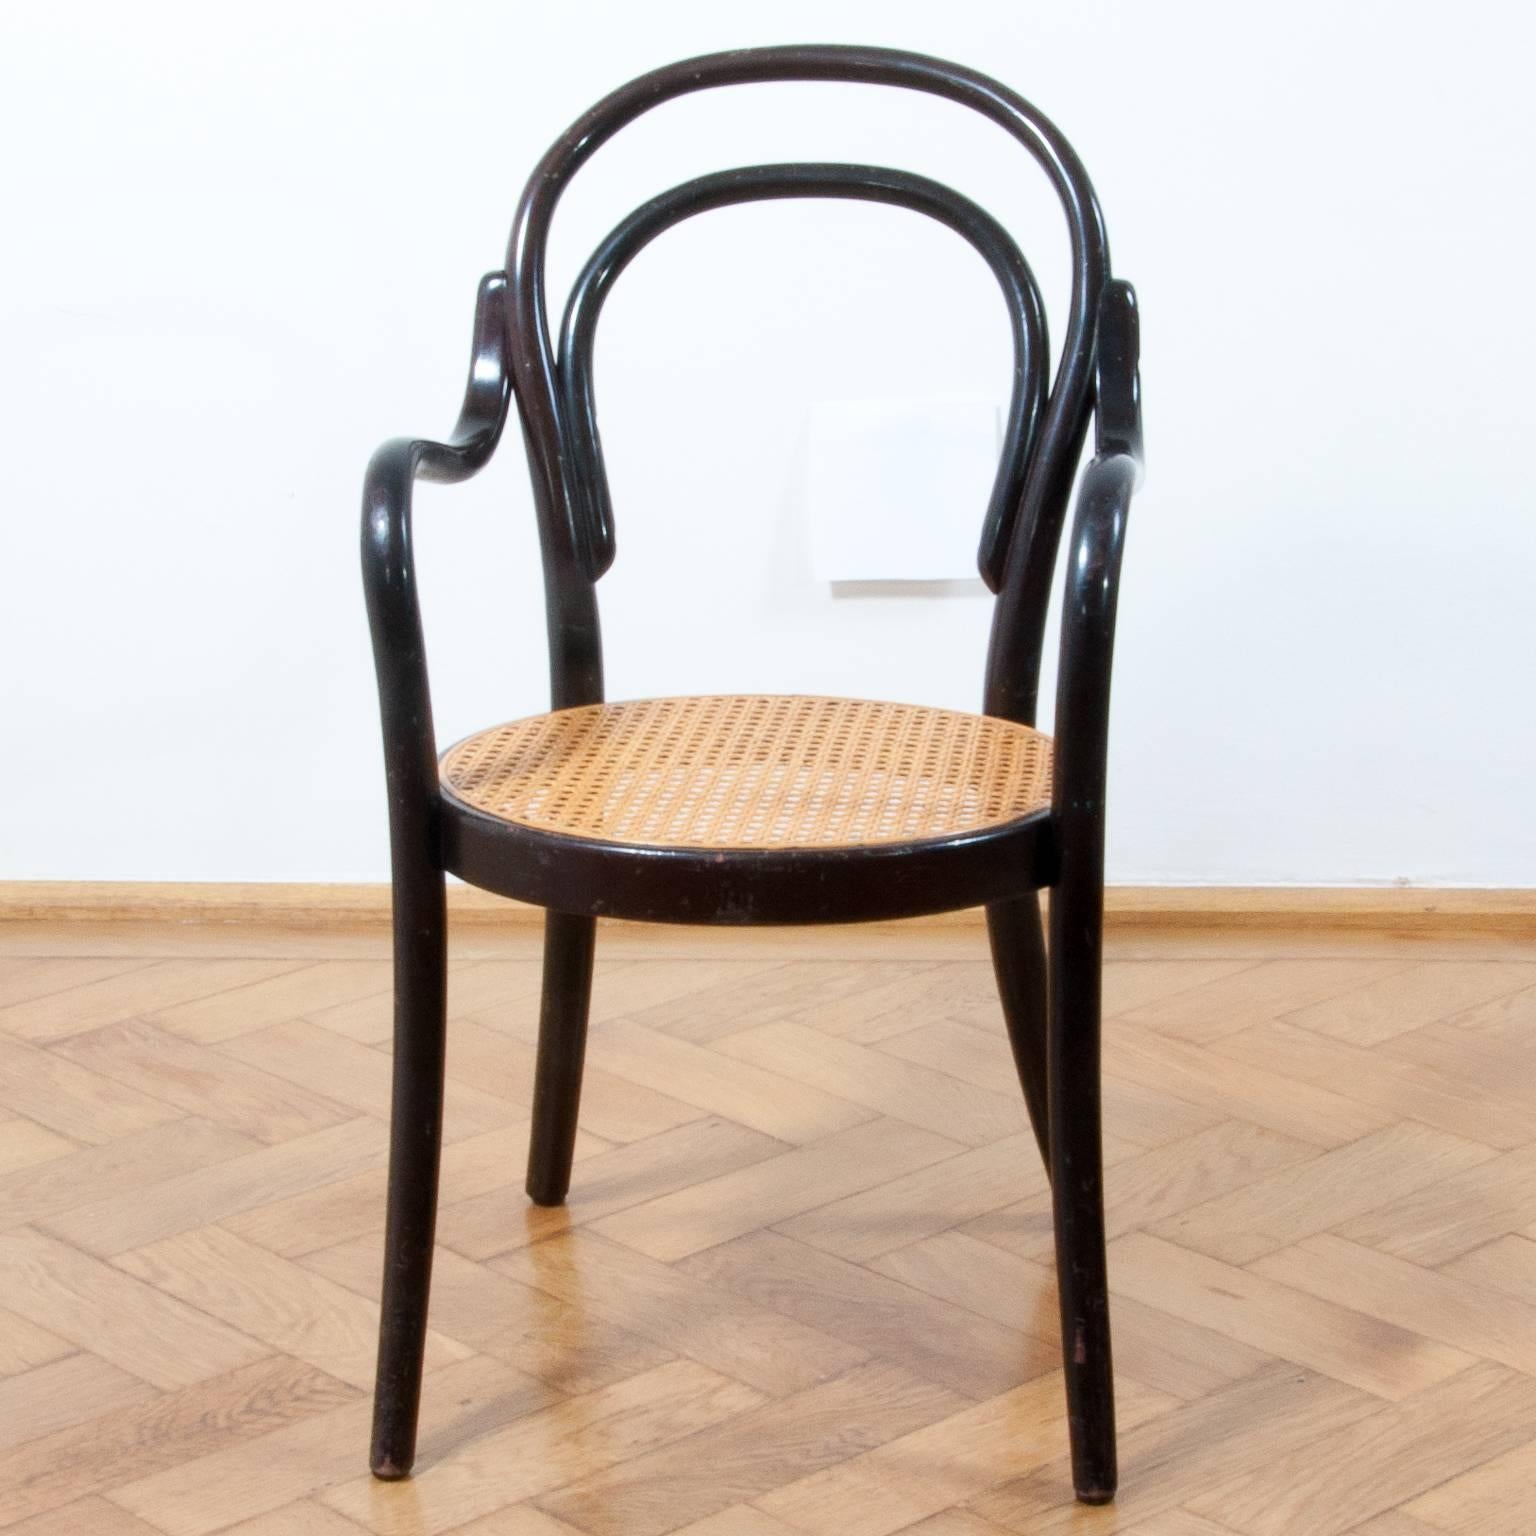 Very rare, antique and Austrian Thonet chair, which was produced between 1910-1929 and was designed by the Gebruder Thonet.
The company Thonet was found by Michael Thonet and was greatly expanded by this sons. They perfected the process of bending